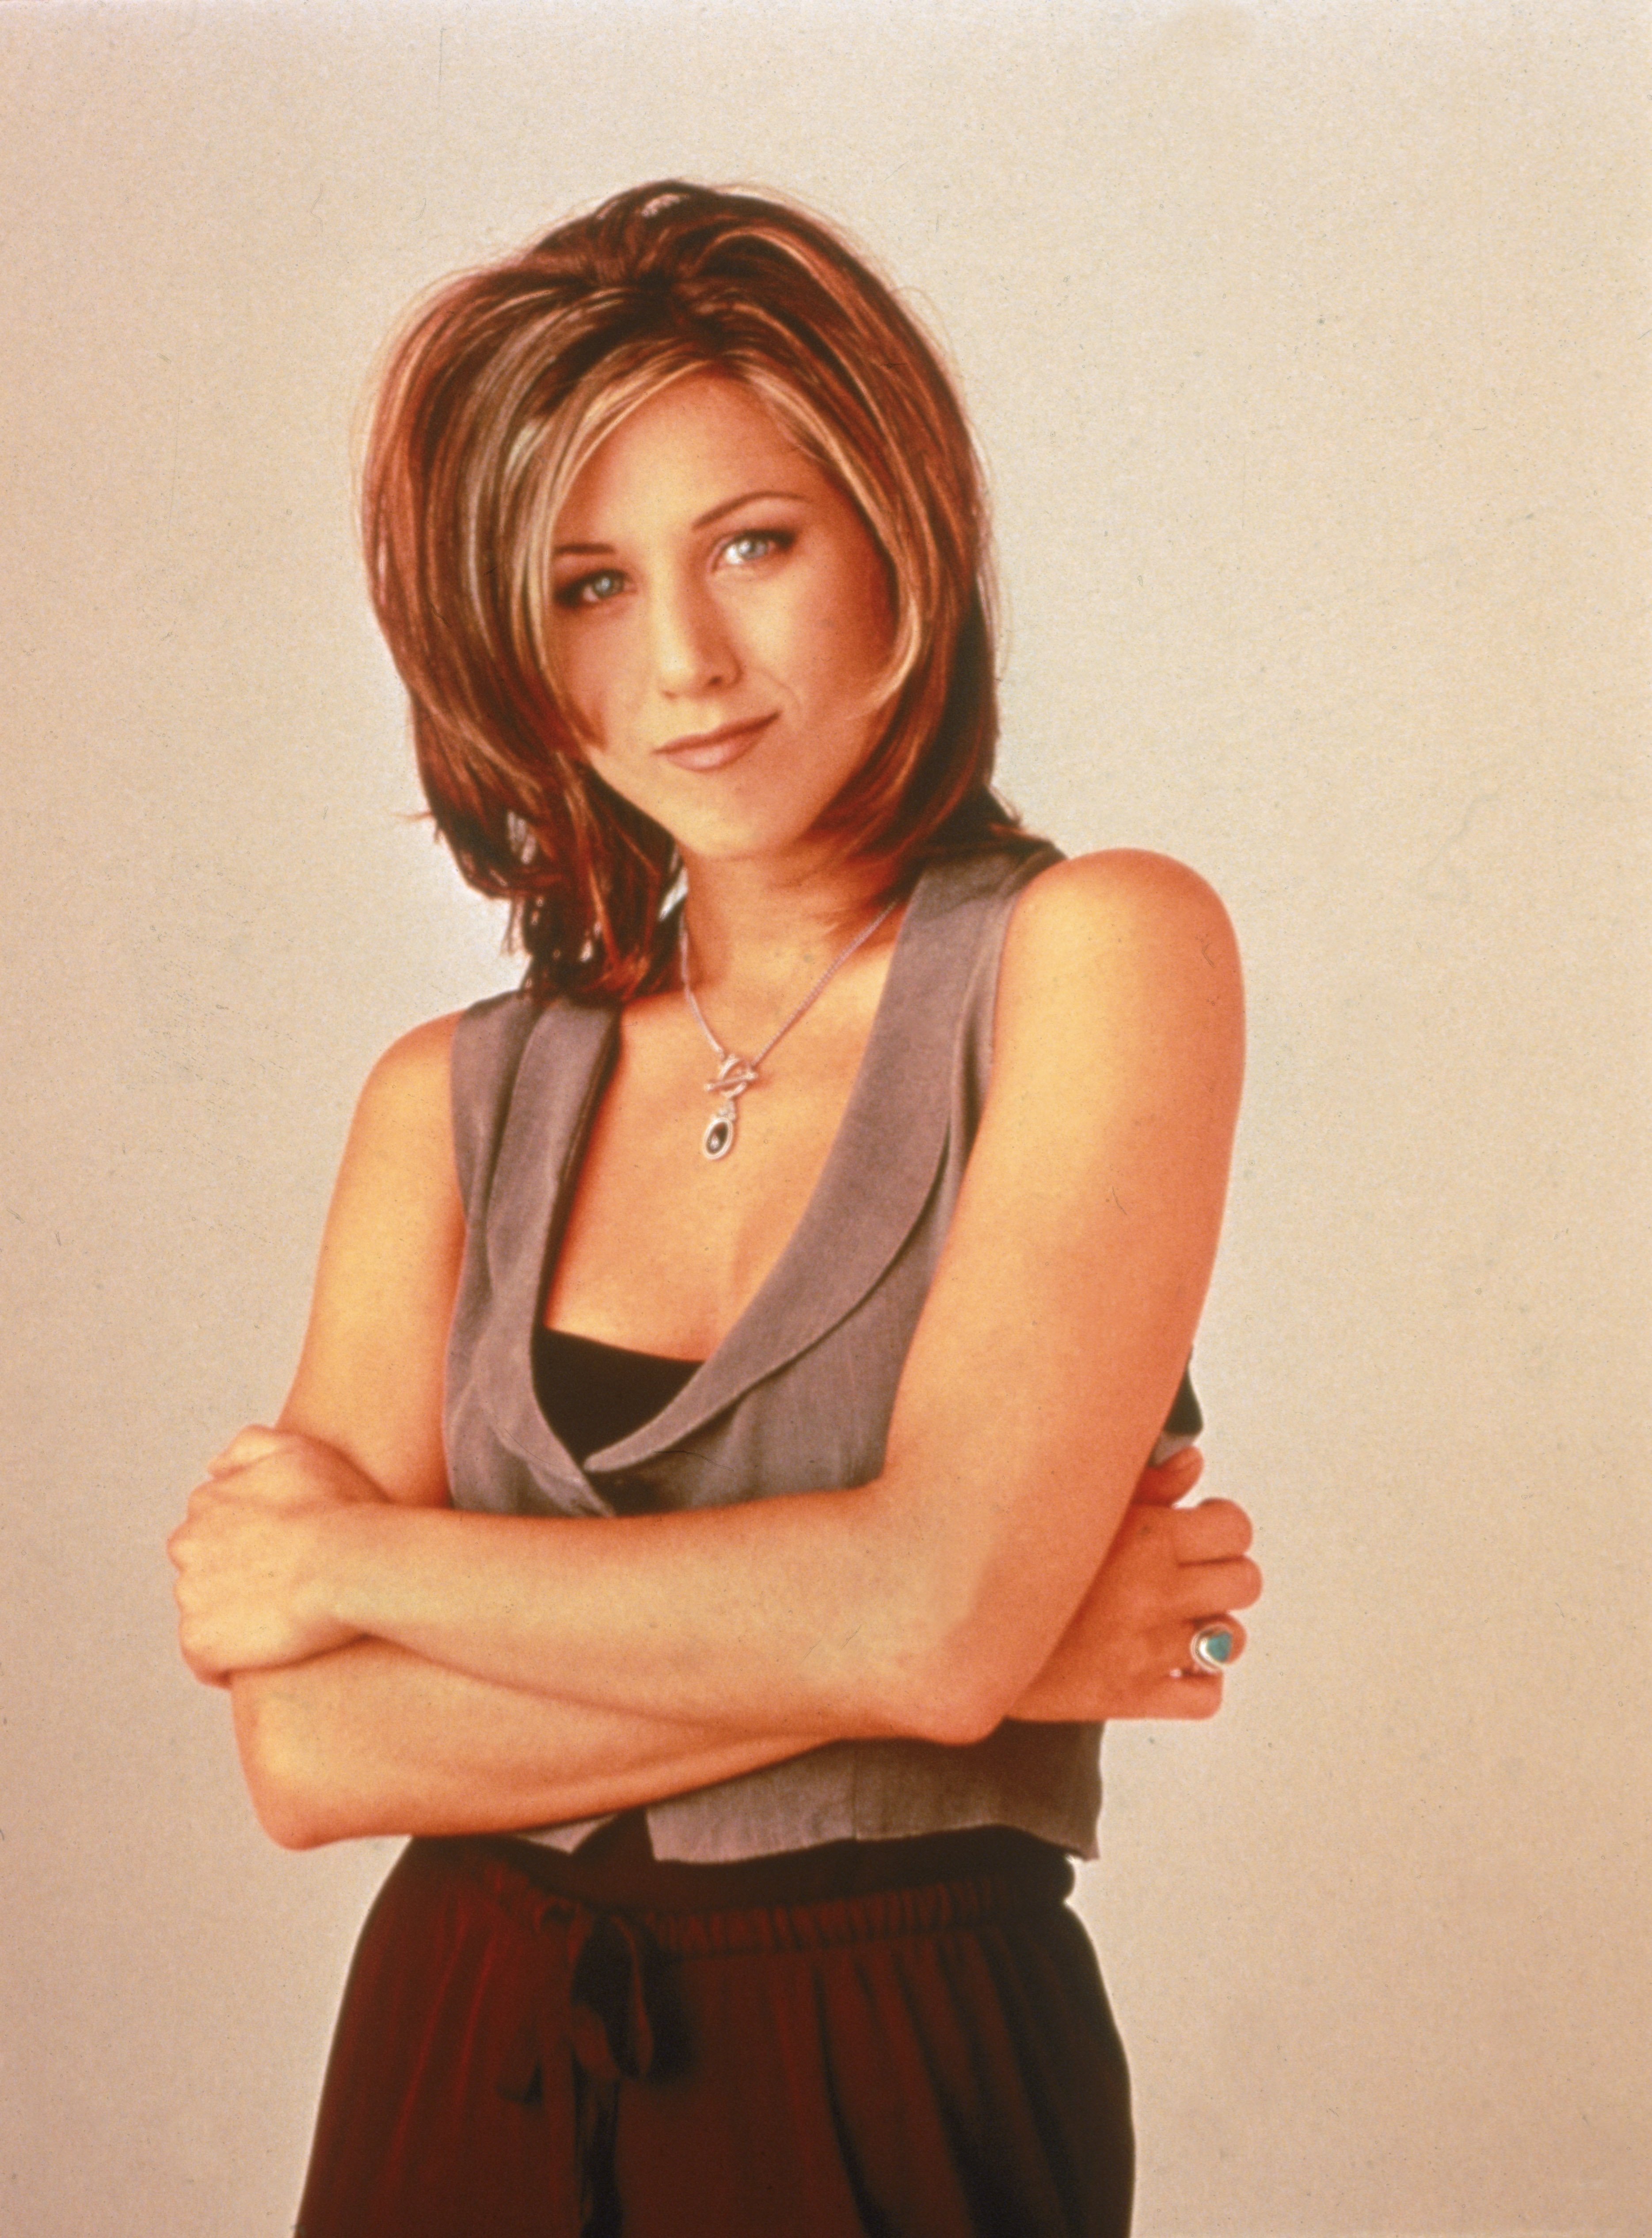 Promotional portrait of American actor Jennifer Aniston for the television series, 'Friends,' c. 1995. | Source: Getty Images.